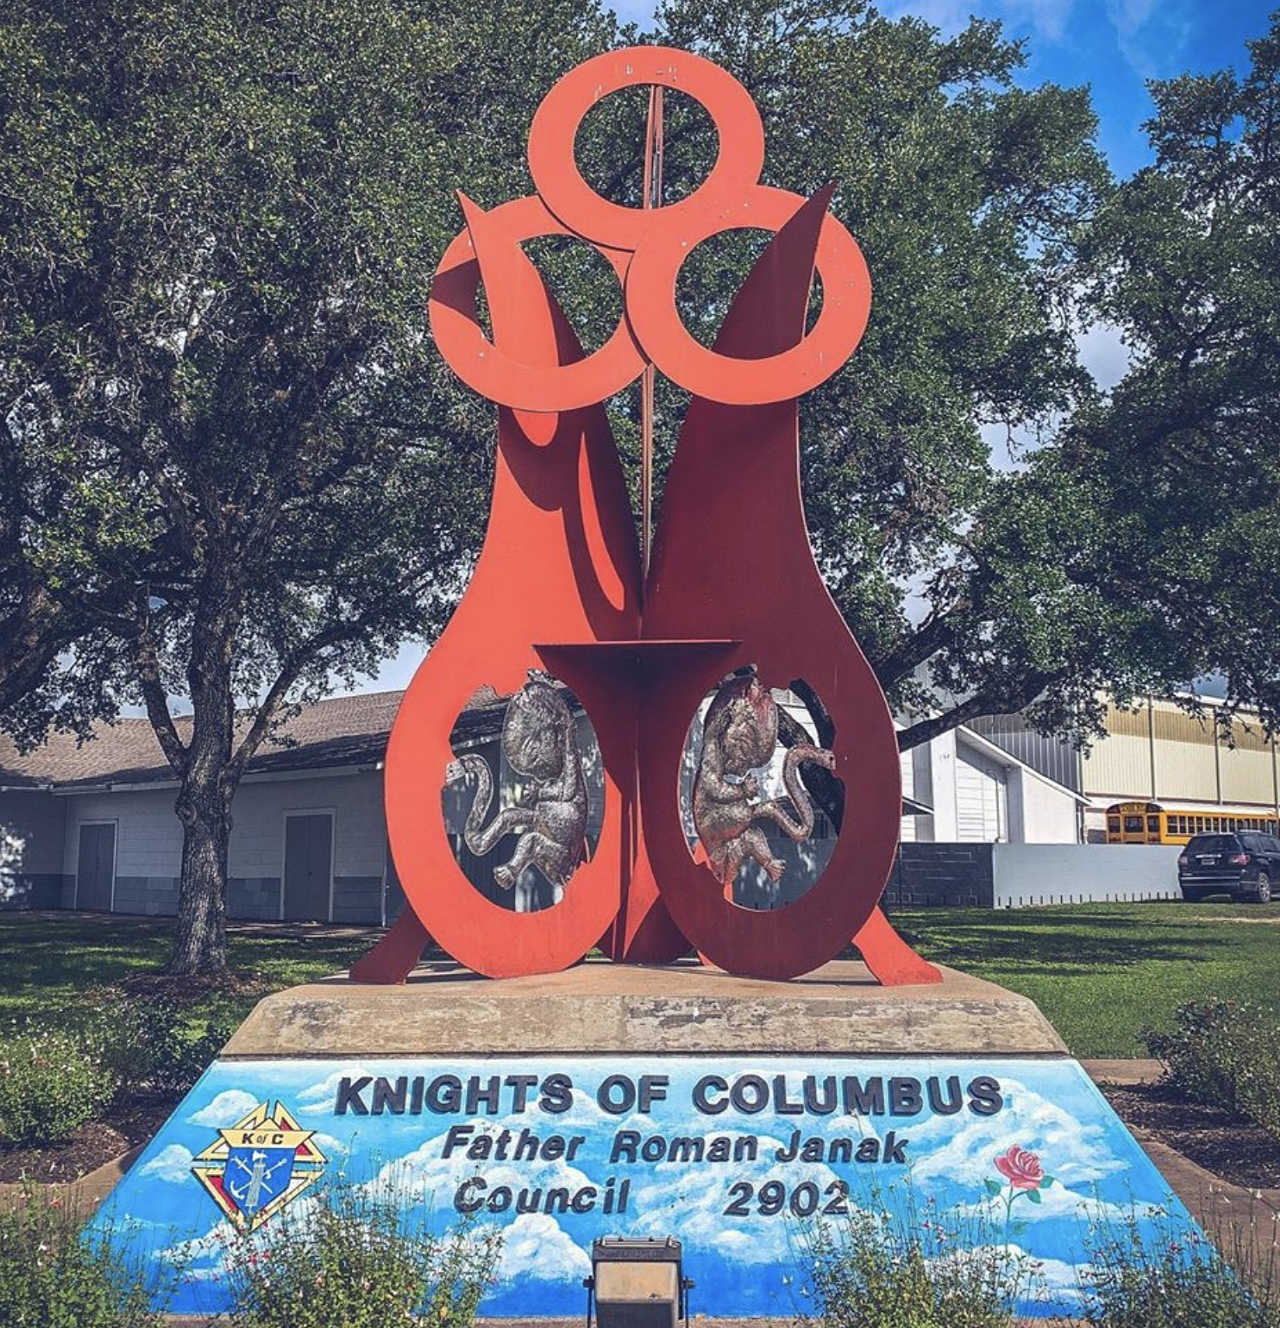 Fetus Monument, Schulenberg, TX
405 South St., Schulenburg, roadsideamerica.com 
At the entrance of the Knights of Columbus building stands an abstract monument holding three silver fetuses. This catholic fraternity organizes anti-abortion activism and  this creepy statue is apparently part of the organization’s push to create a “culture of life.”  Photo via Instagram /  wondersofbackroads